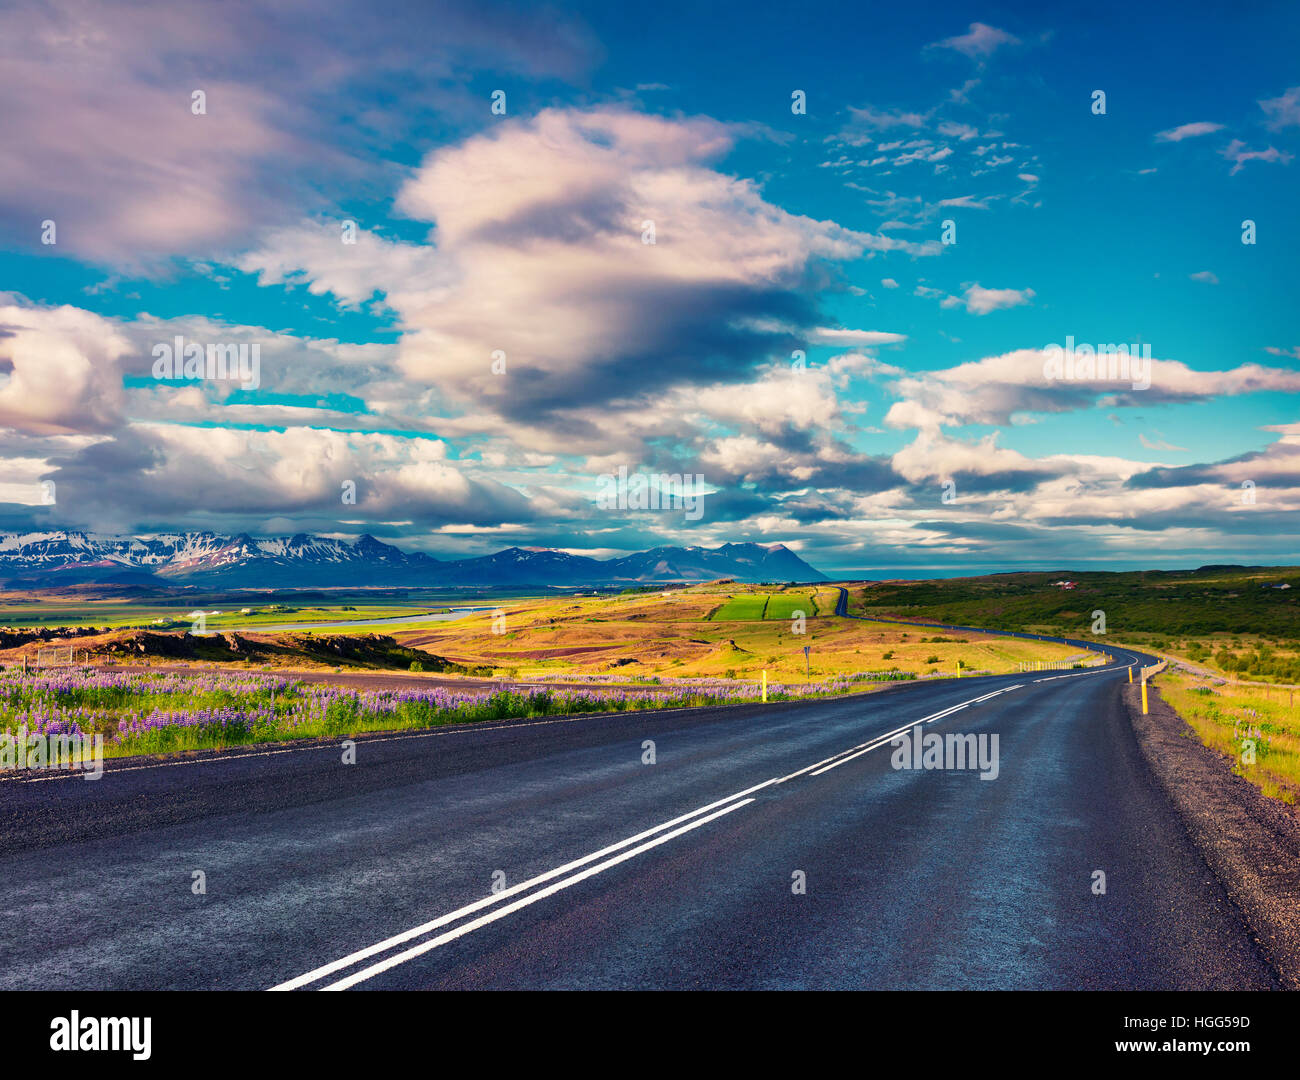 Empty asphalt road with colorful cloudy sky. Beautiful outdoor scenery in Iceland, Europe. Stock Photo